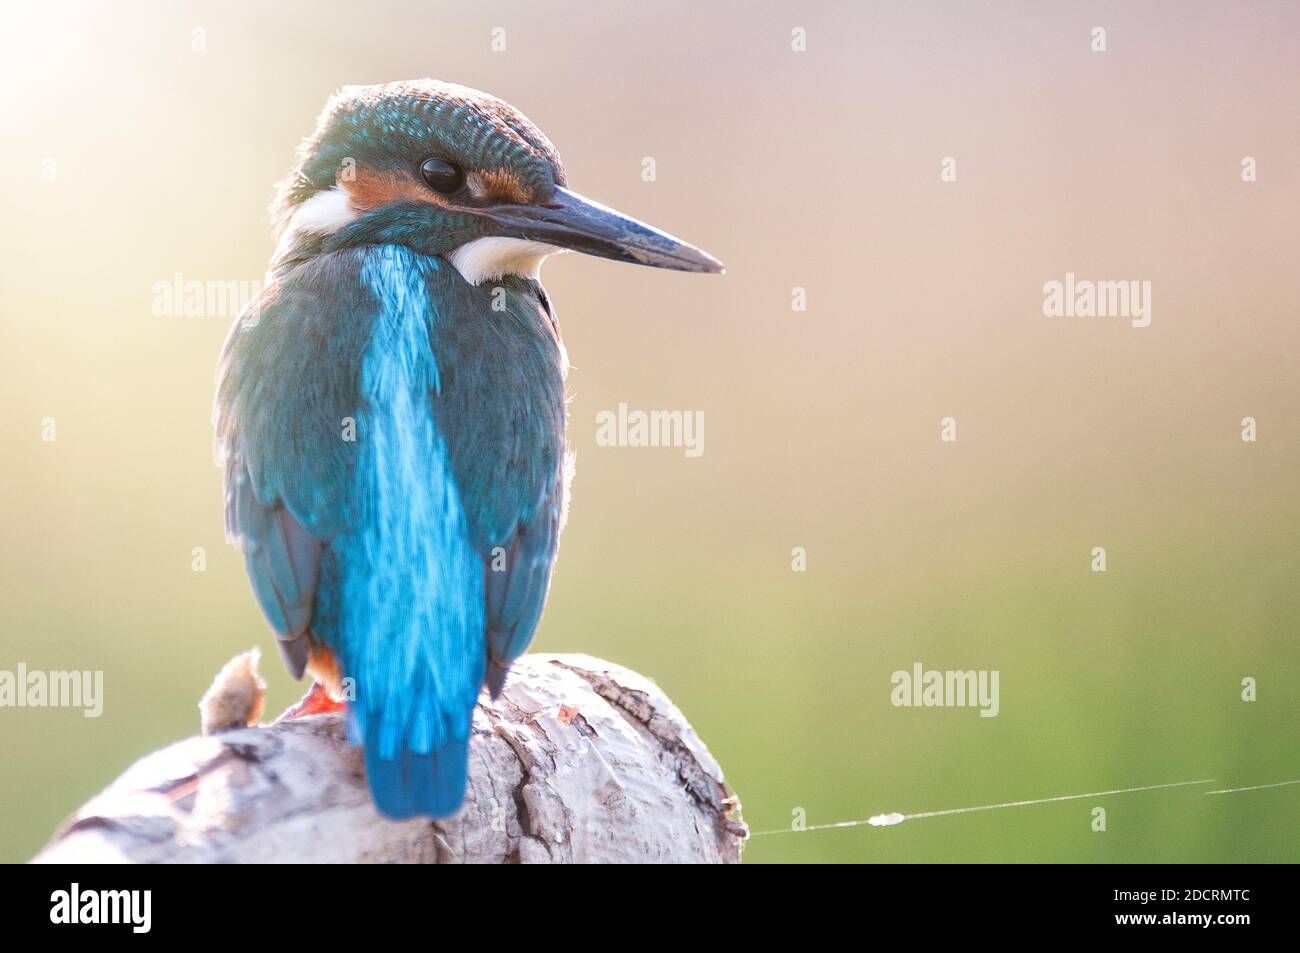 Common Kingfisher (Alcedo atthis) sitting on a beautiful background. Stock Photo